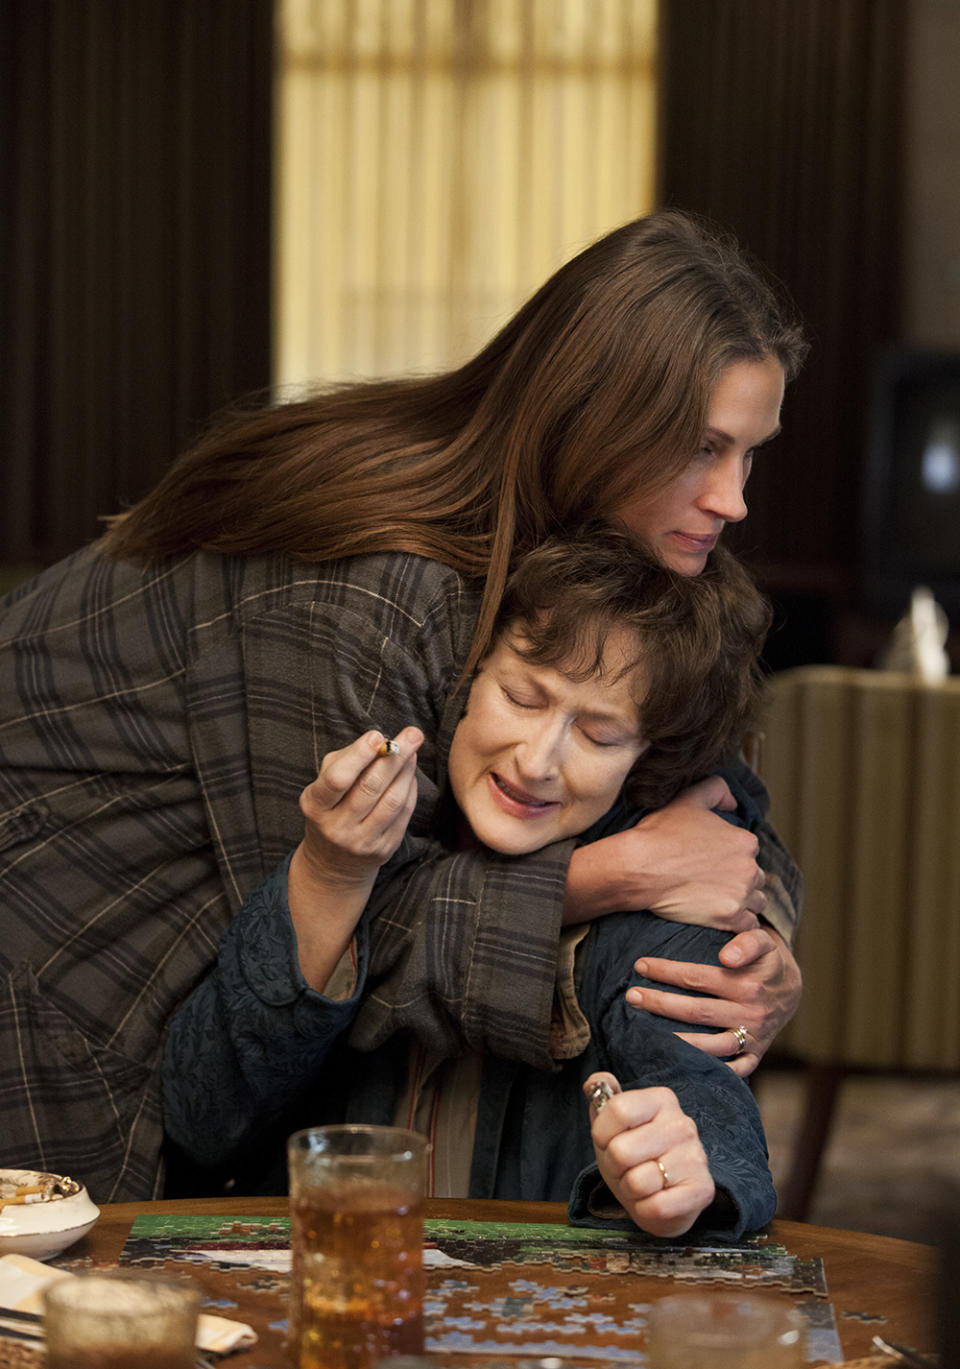 This publicity image released by The Weinstein Company shows, from left, Julia Roberts and Meryl Streep in a scene from "August: Osage County." The film is nominated for a Writers Guild Award for adapted screenplay announced on Friday, Jan. 3, 2013. The Writers Guild Award winners will be honored on Feb. 1, 2014, simultaneous in Los Angeles and New York. (AP Photo/The Weinstein Company, Claire Folger)